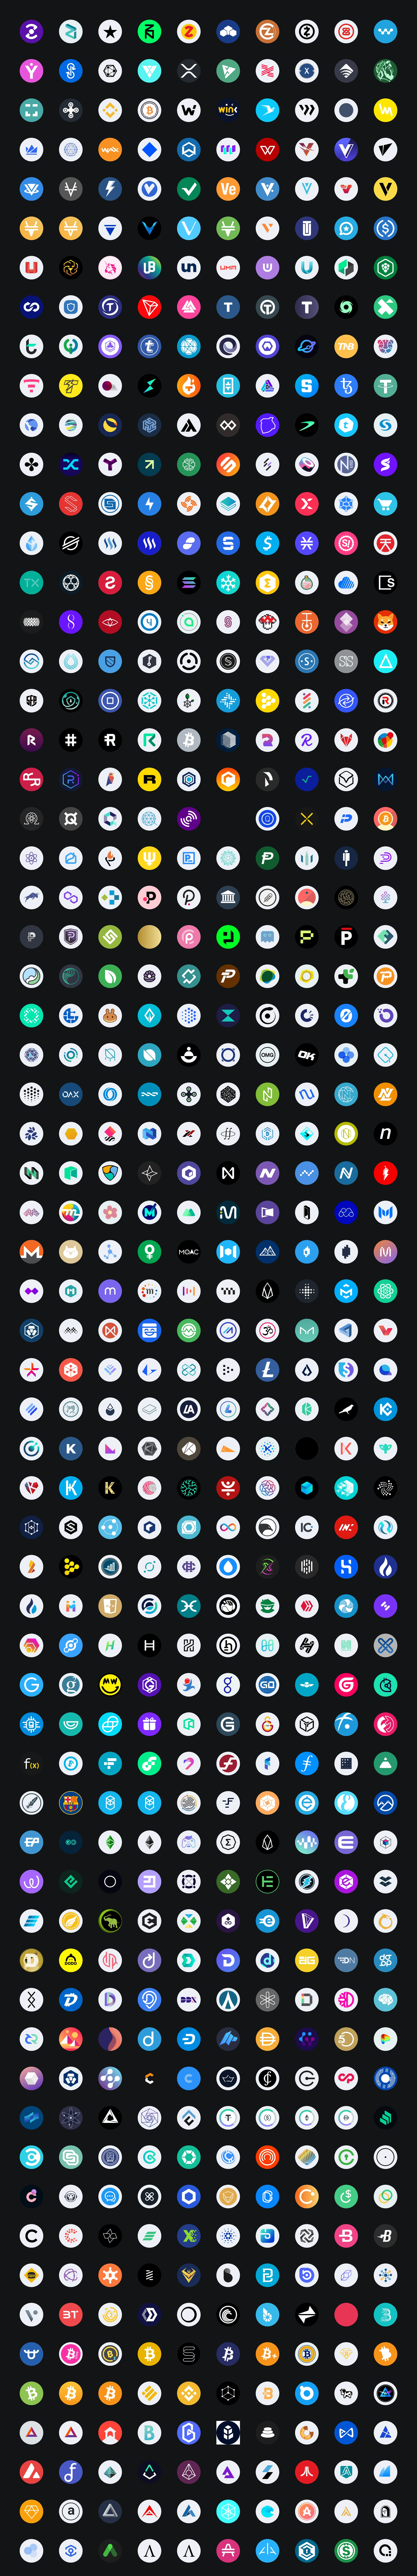 Free 579 Cryptocurrency Vector Logos - 579 Cryptocurrency free vector logos for Figma, Sketch and Adobe XD.